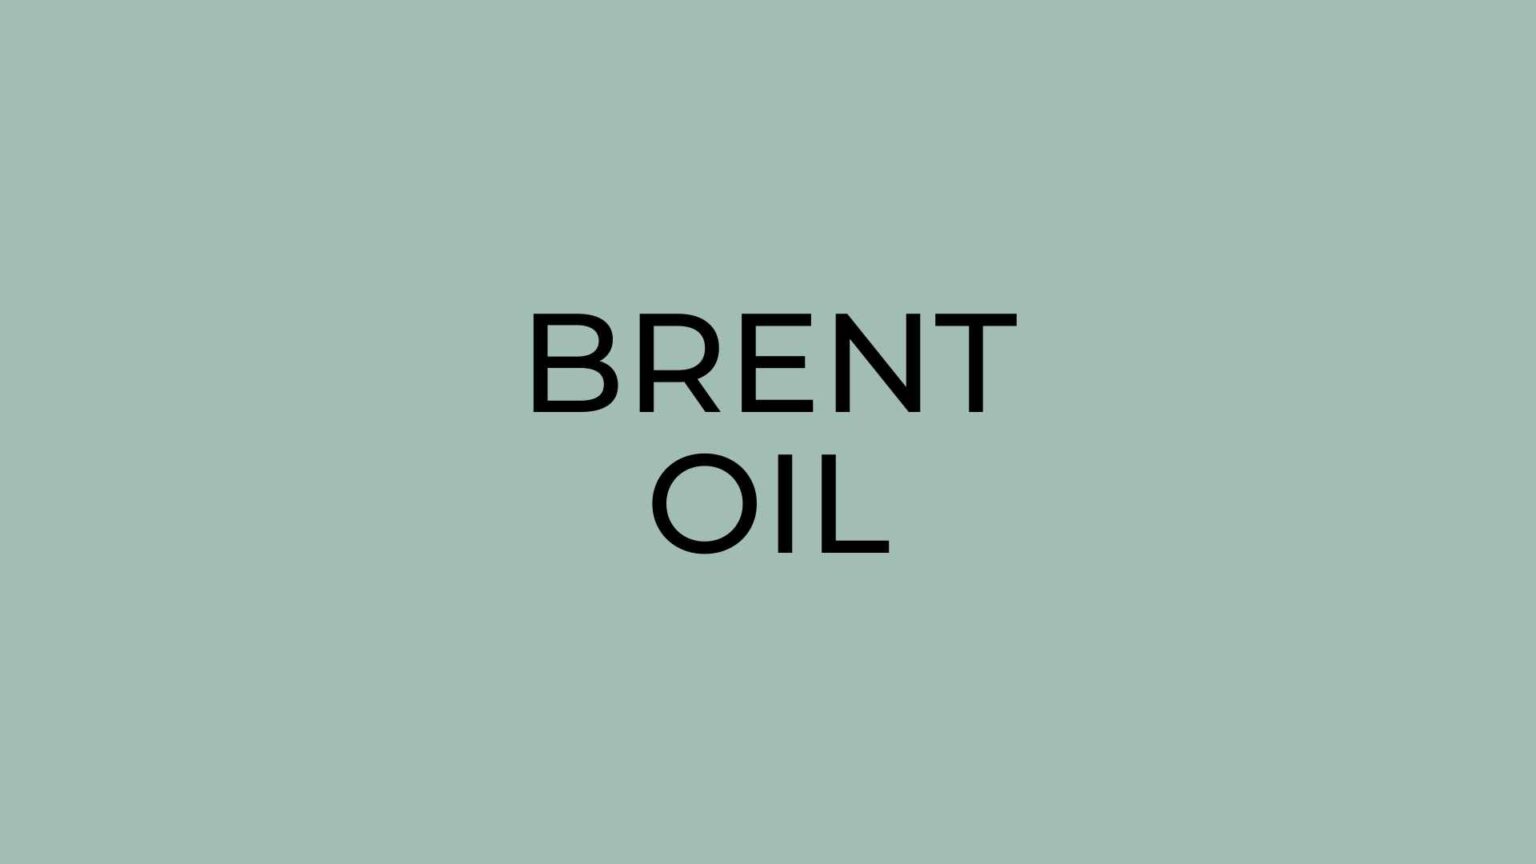 Brent crude oil price today .28+0.54 (+0.72%) – 29 July 21